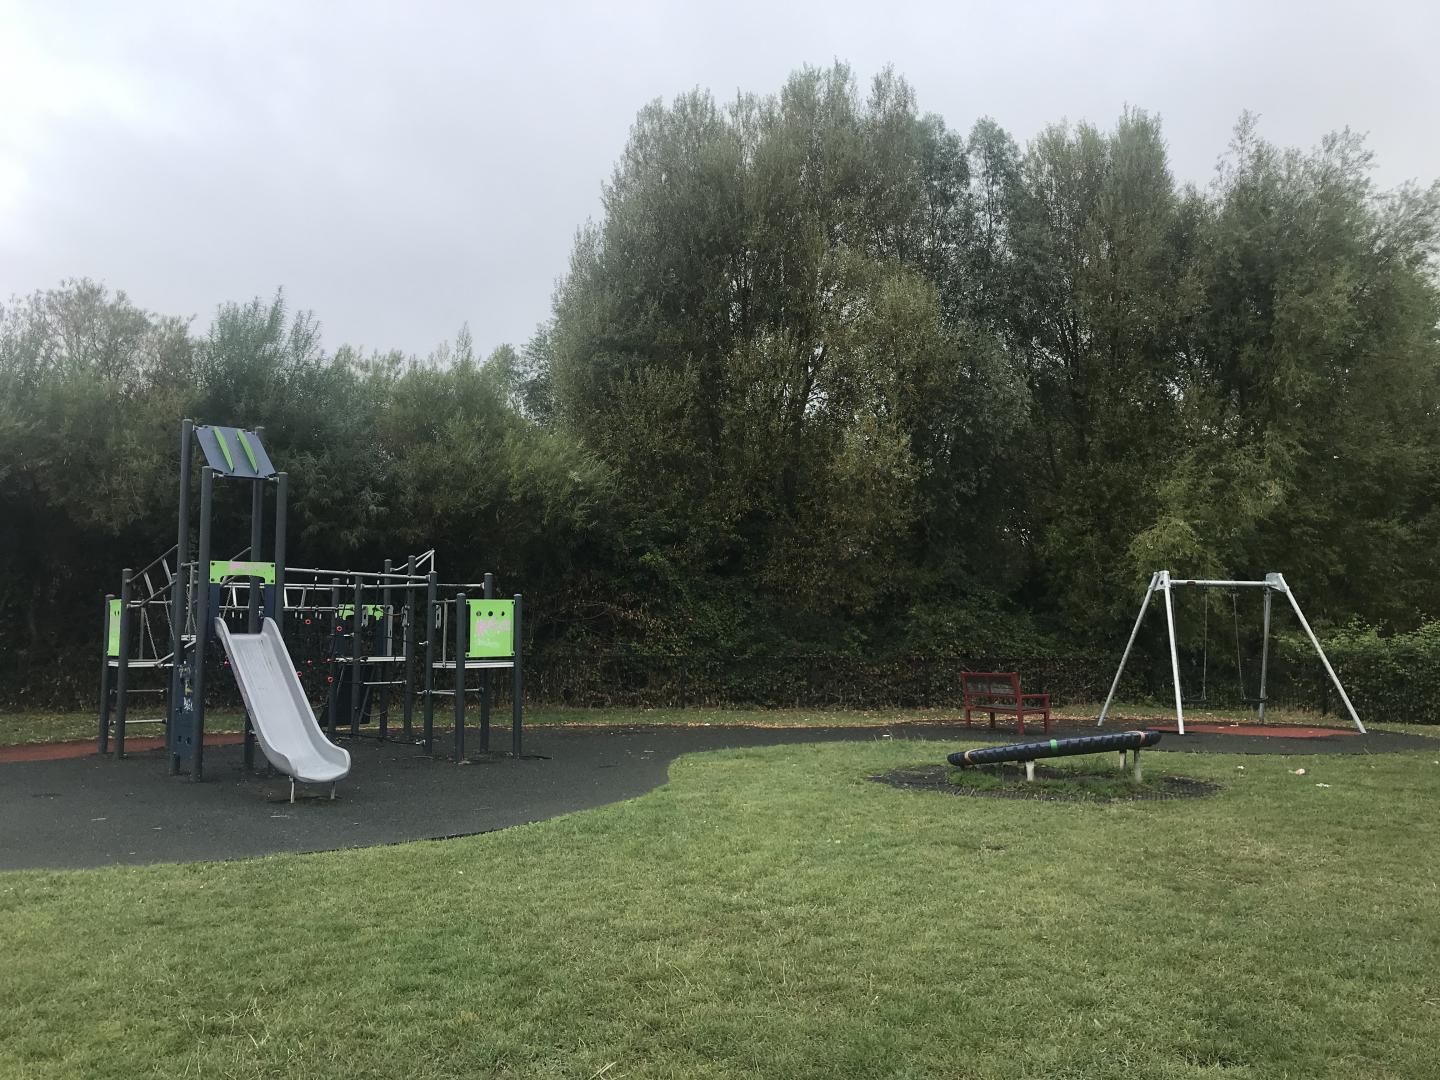 A photo of  the Plumley Park South play area in Weston-super-Mare.